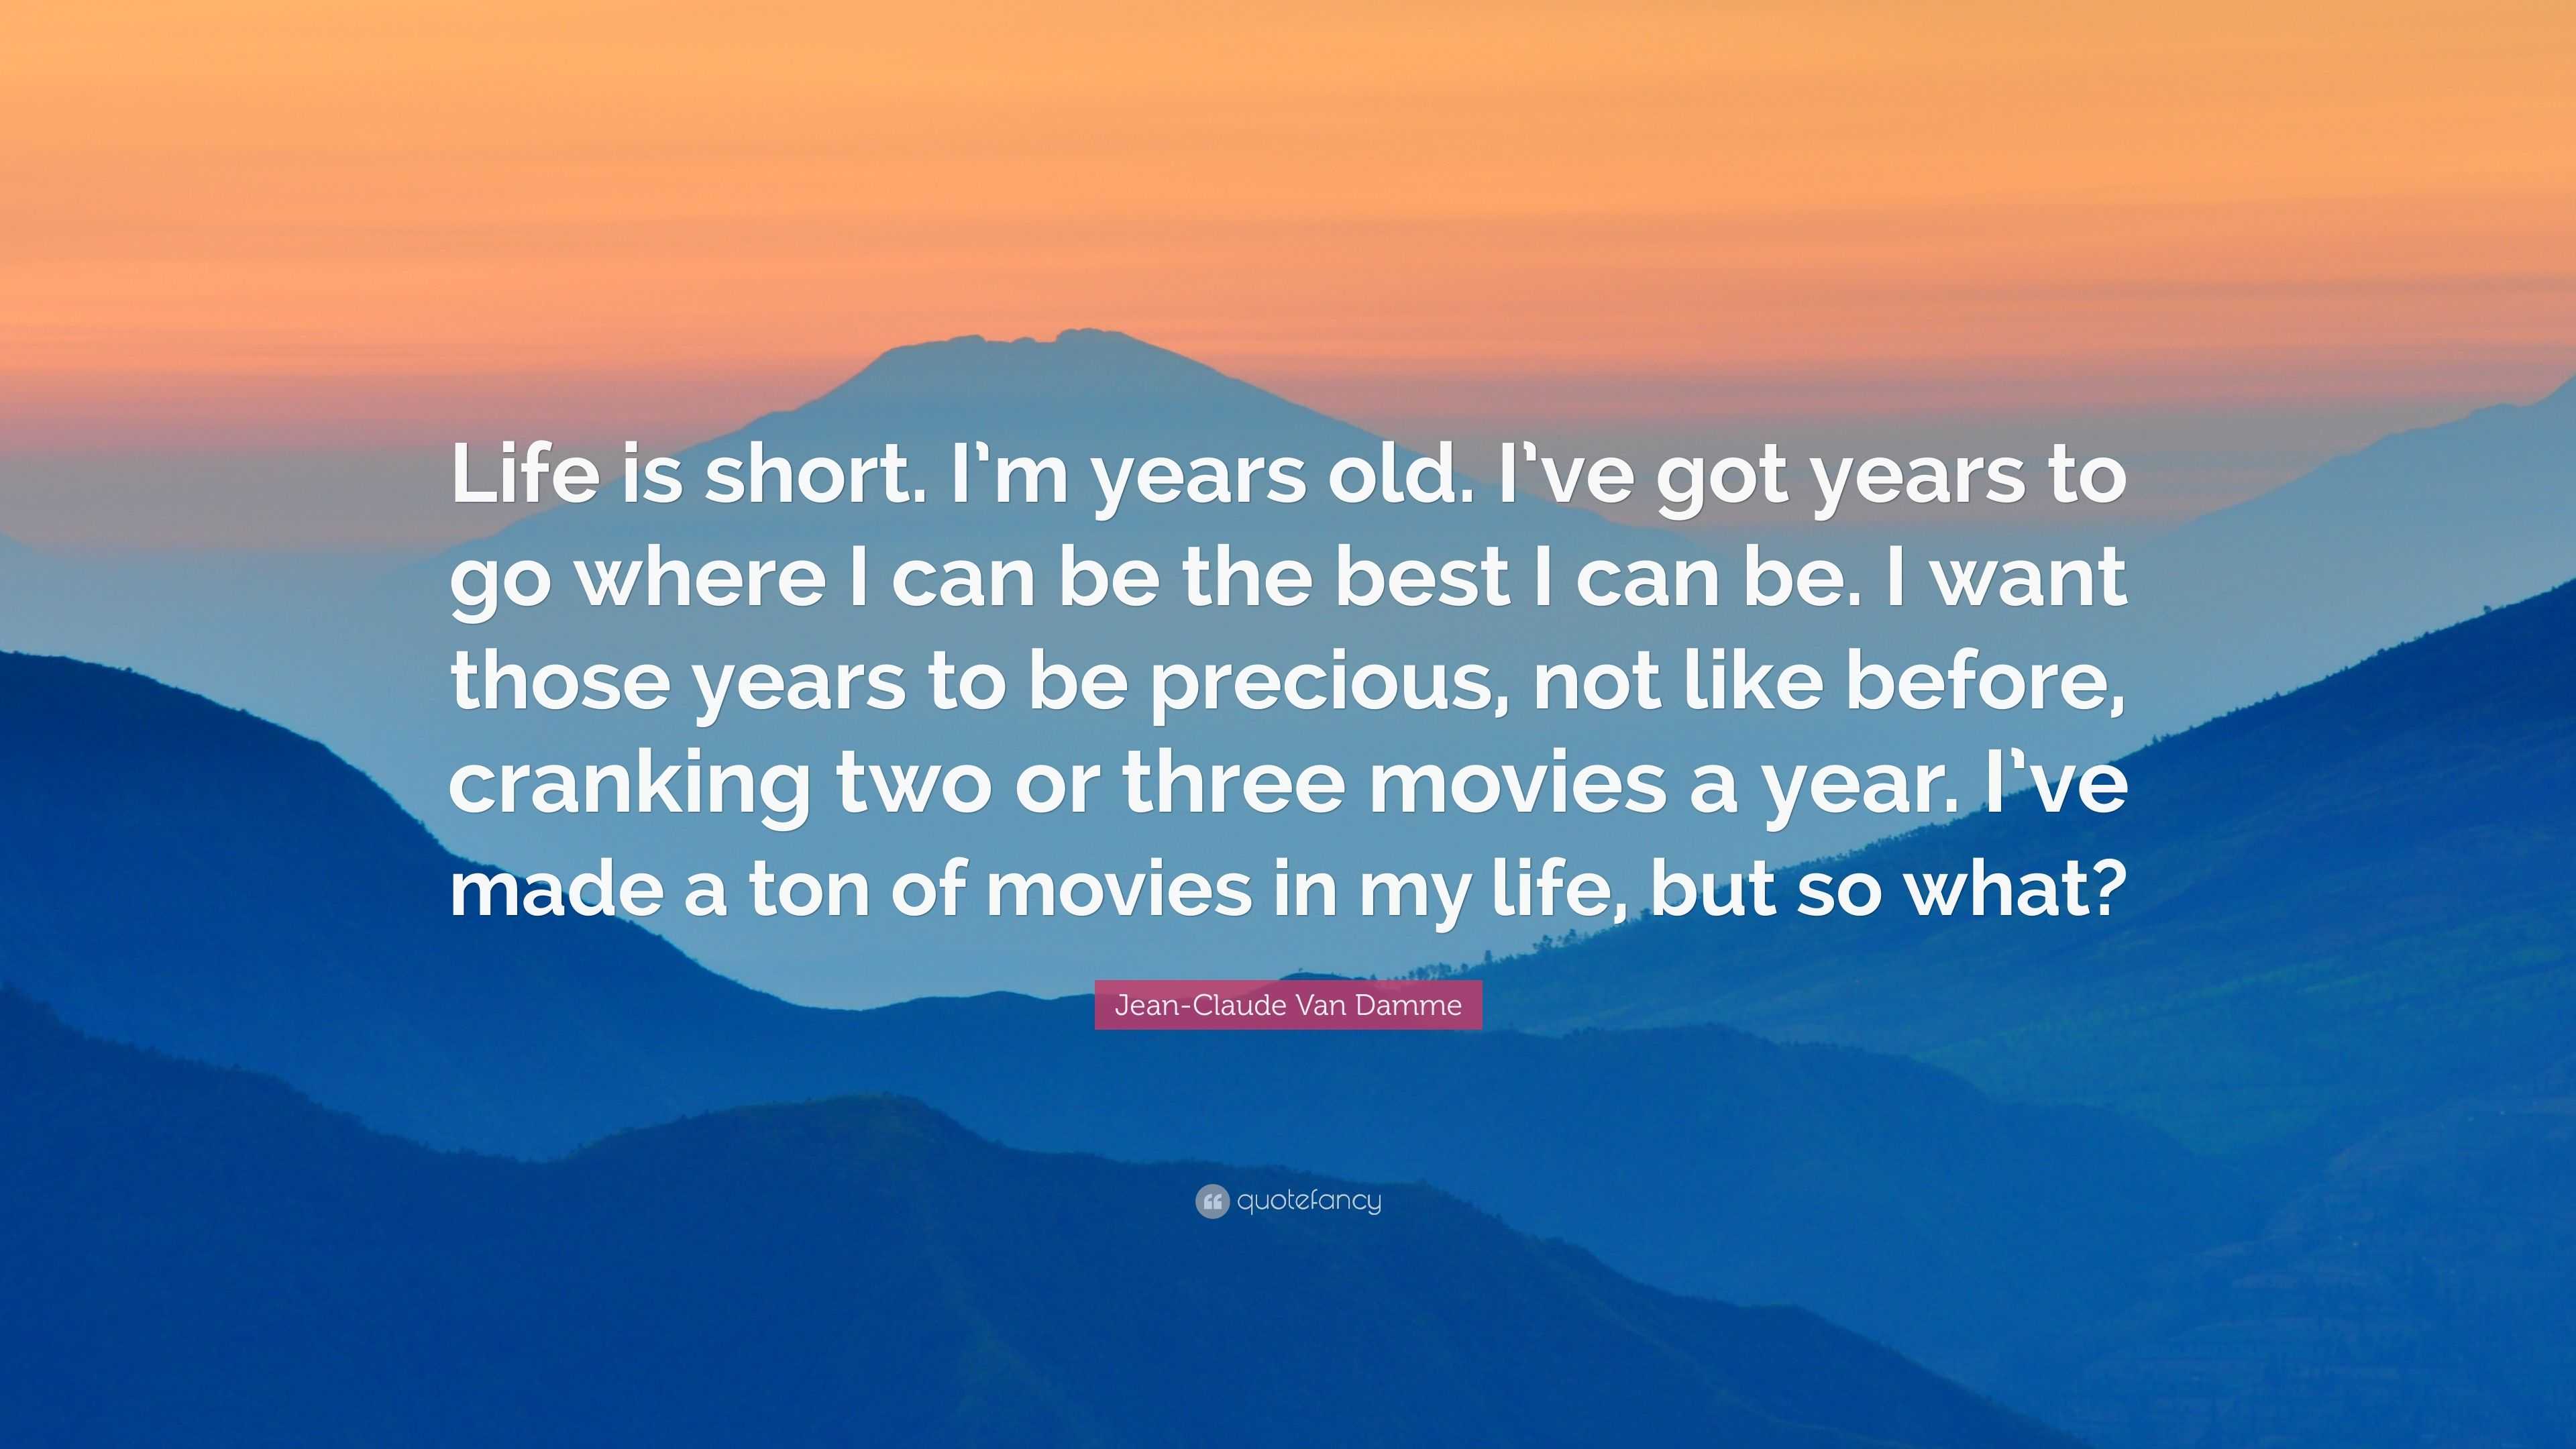 Jean-Claude Van Damme Quote: “Life is short. I’m years old. I’ve got ...